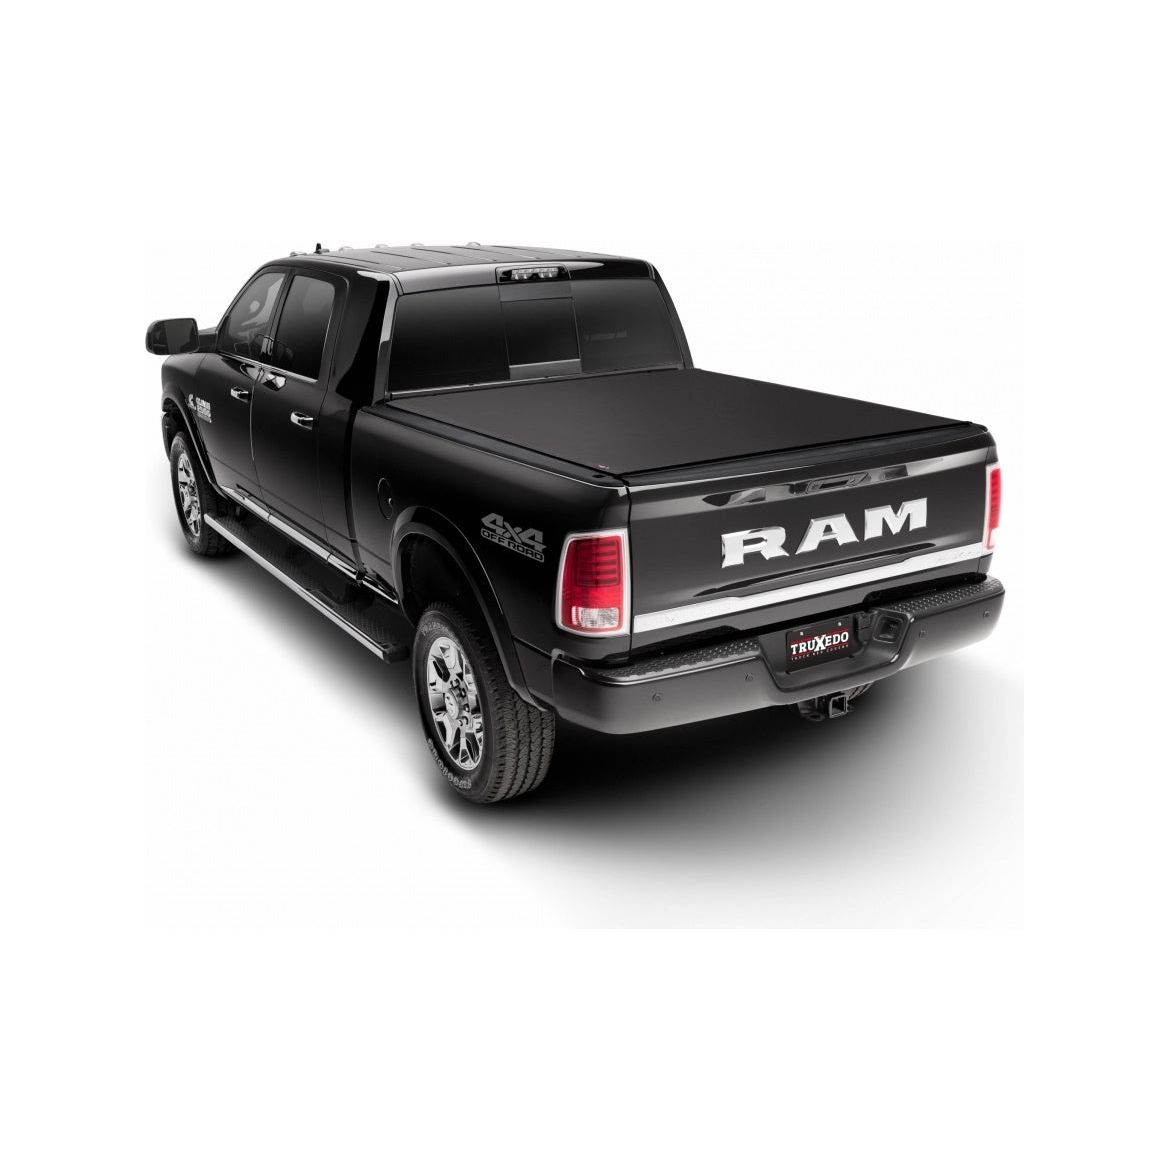 TRUXEDO 1446901 - Pro X15 Bed Cover 09-17 Dodge Ram 1500 6.4' Bed